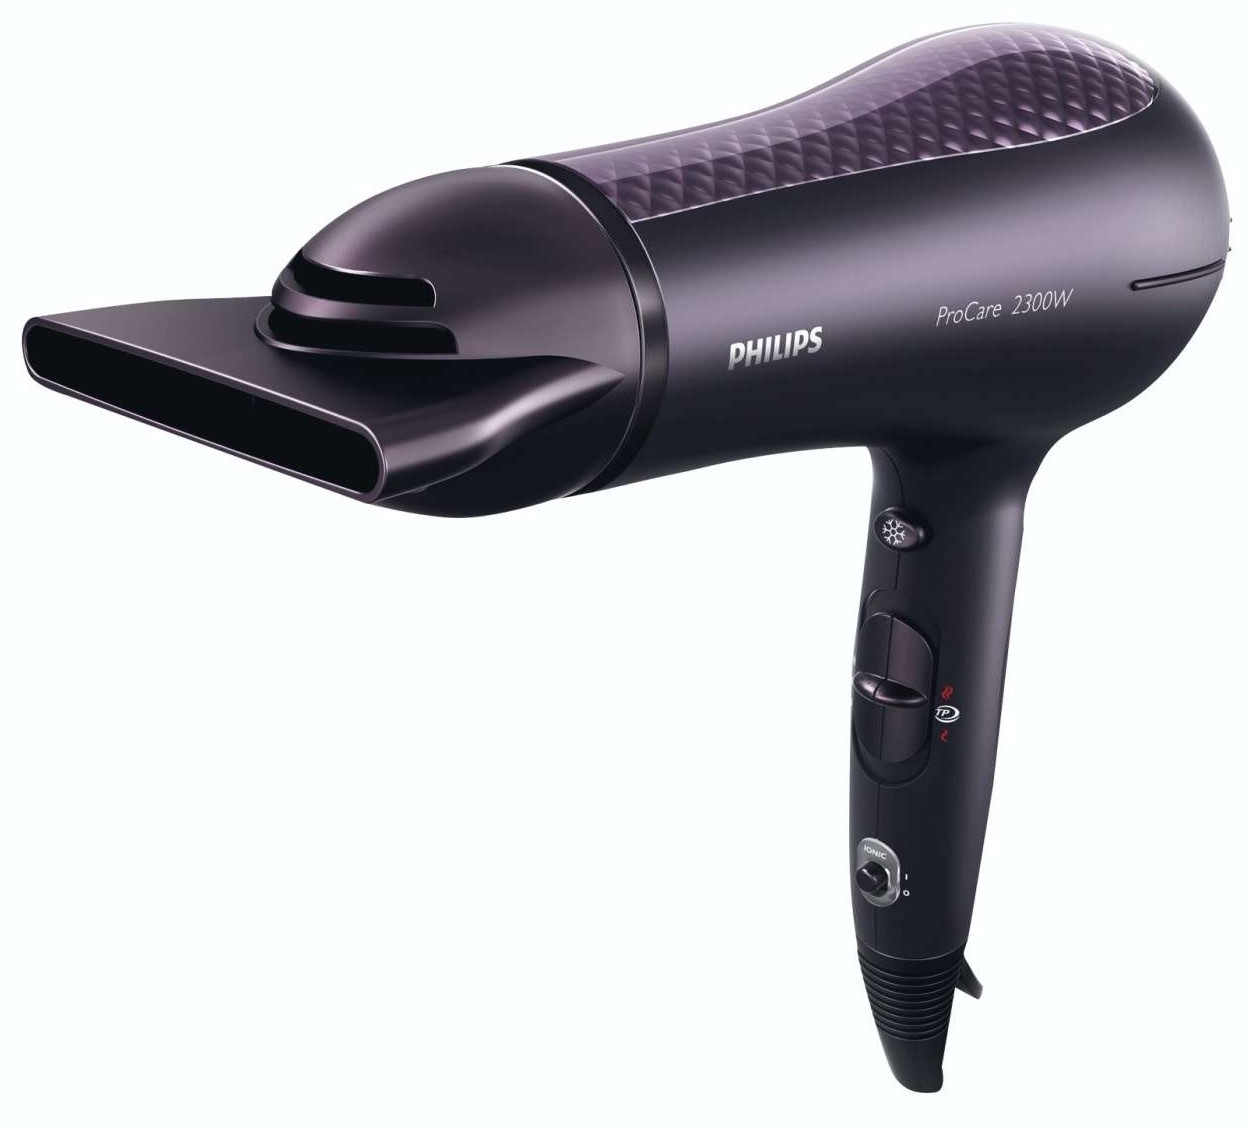 Philips ProCare hairdryer